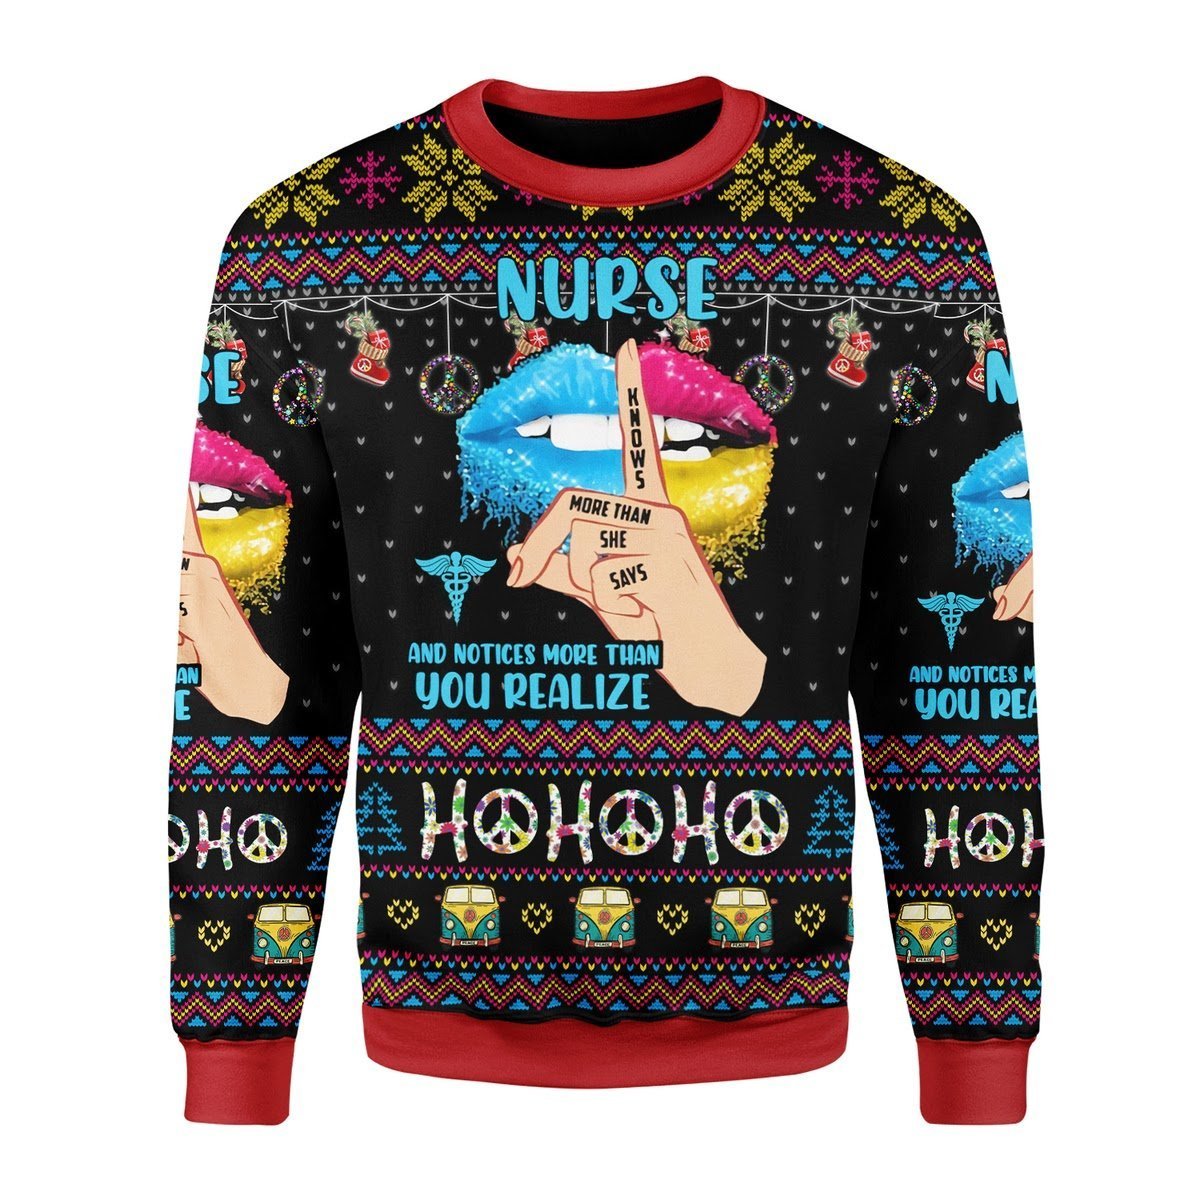  Nurse Hippie Sweater Nurse Knows More Than She Says And Notice More Than You Realize Ugly Sweater Nurse Sweater 